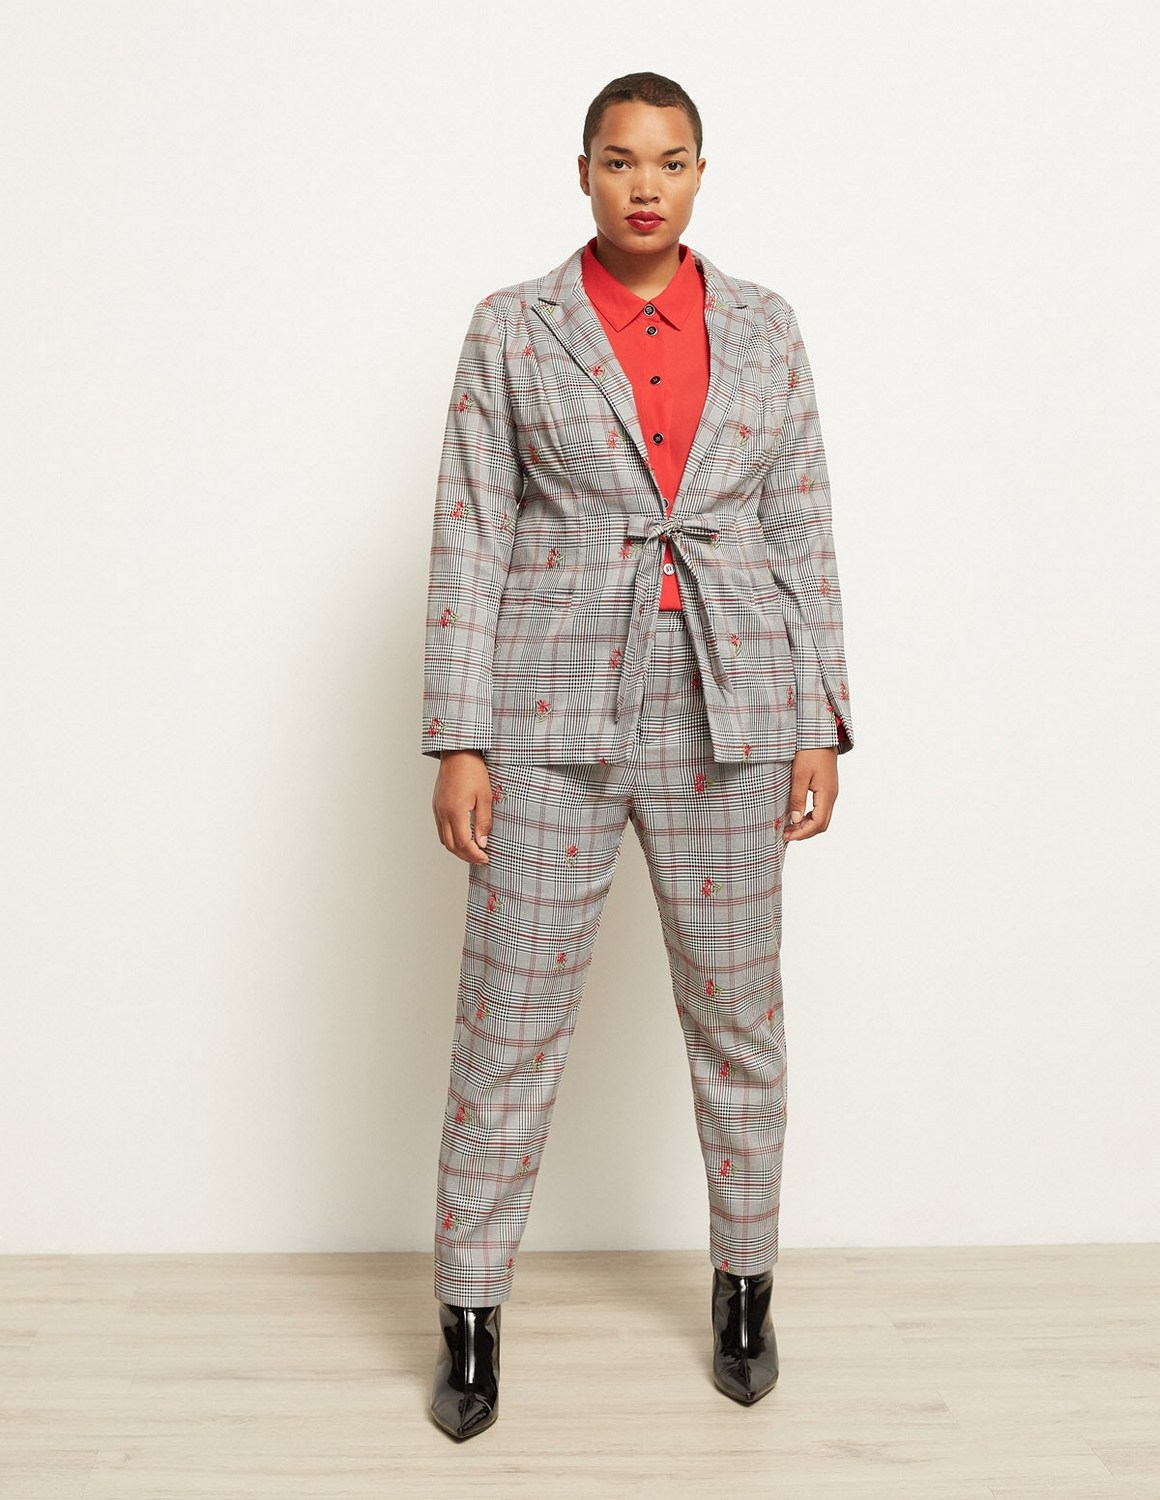 Plus Size Suiting for Spring- Manon Baptiste Embroidered Check Blazer & Trousers